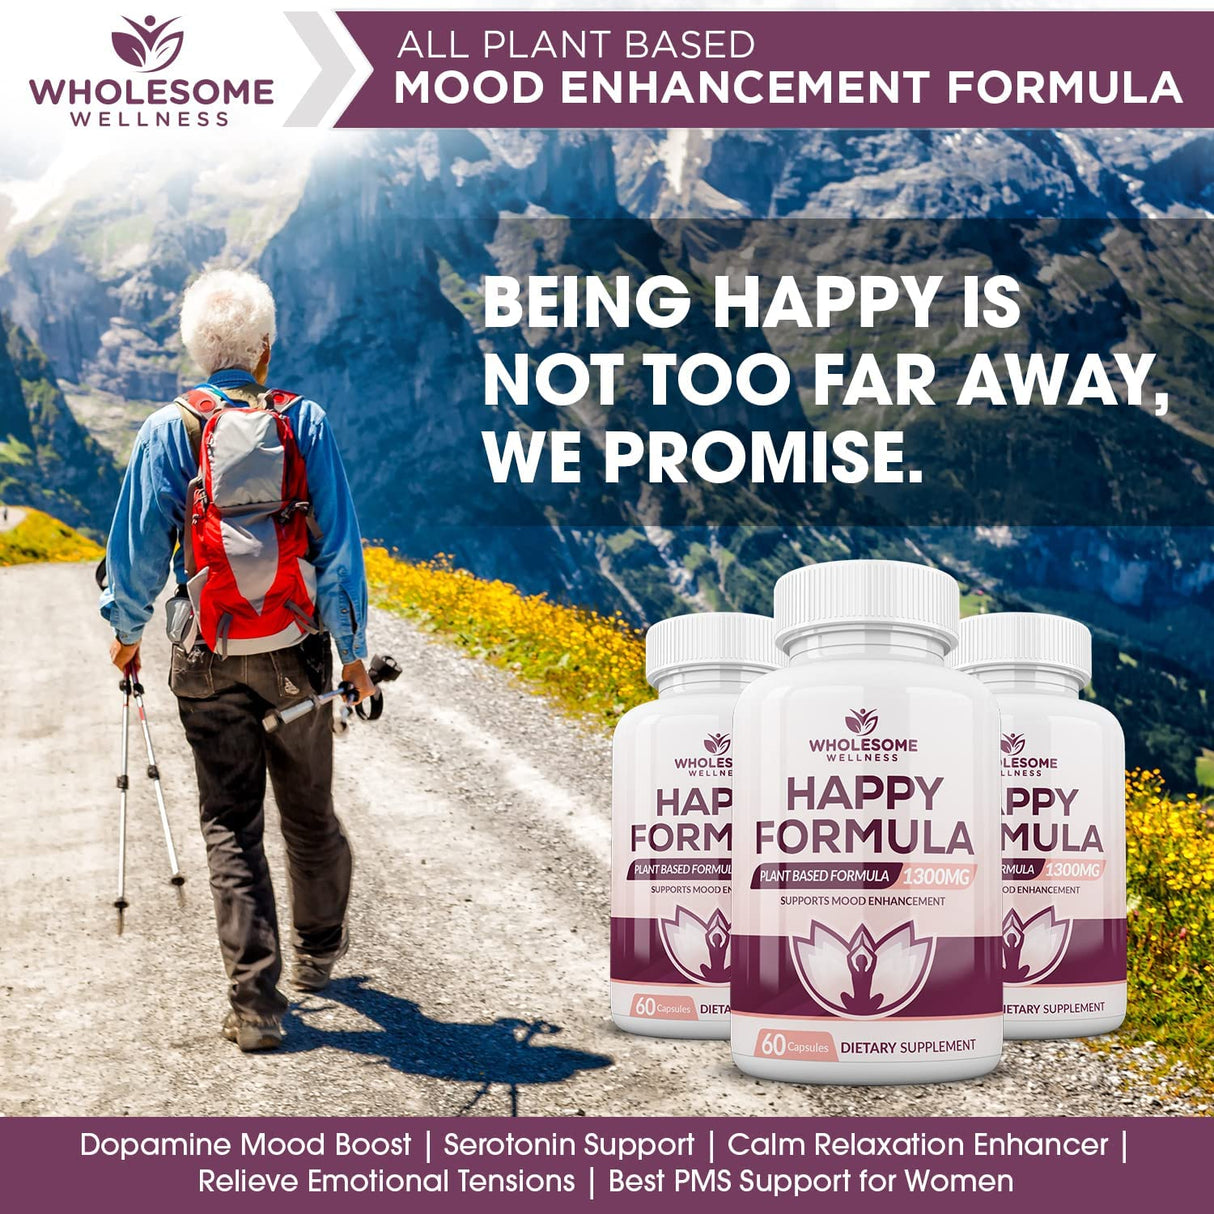 Wholesome Wellness Happy Formula Natural Anxiety Depression Relief 60 Capsulas